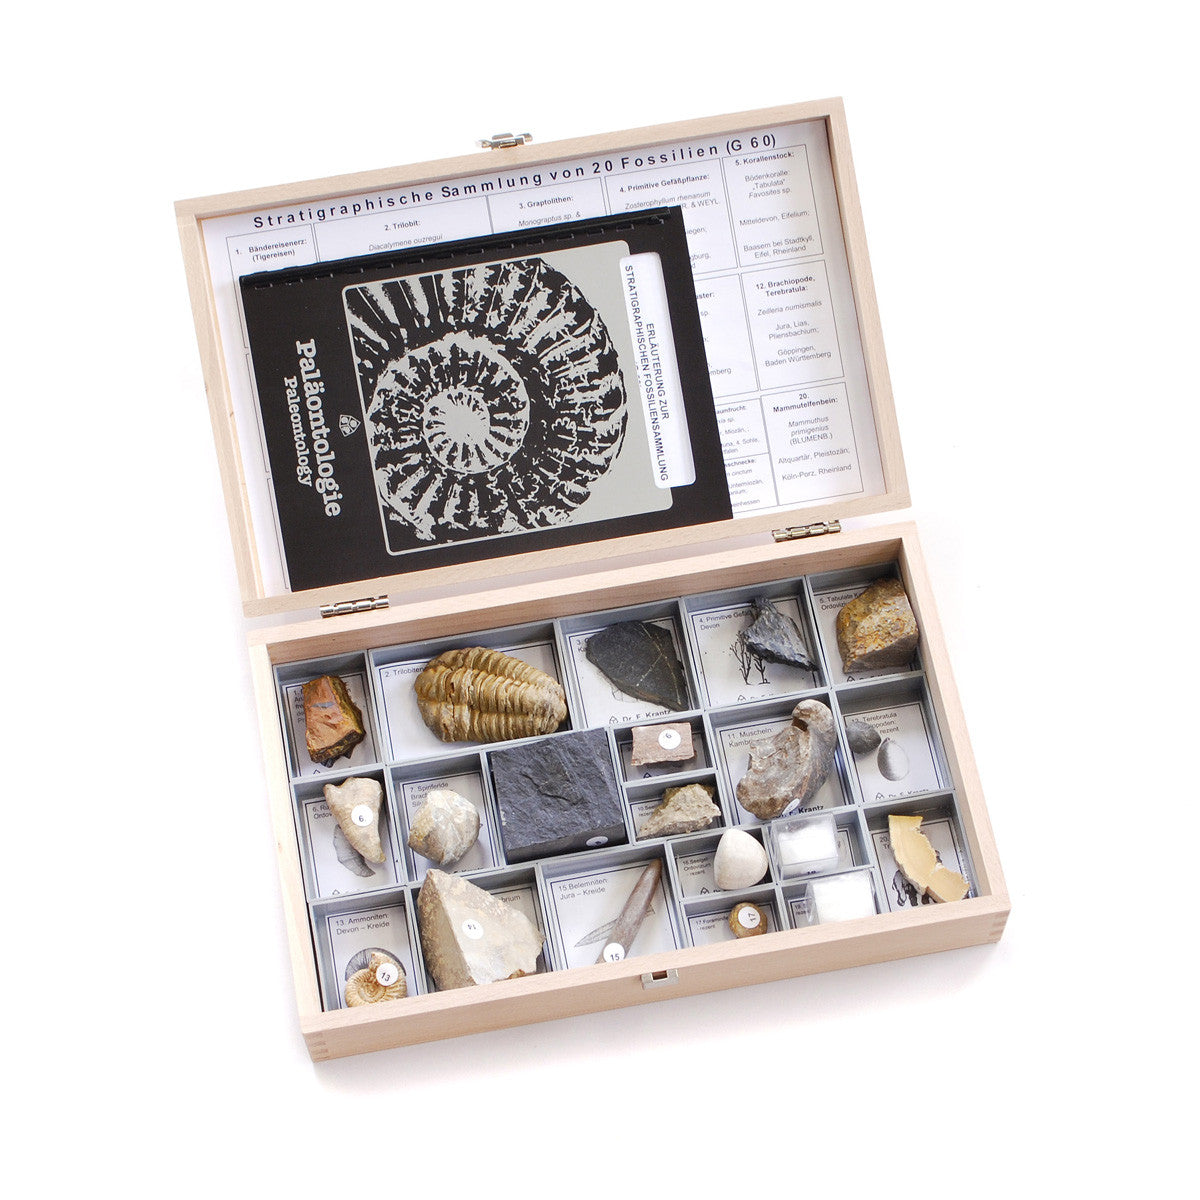 U75020 Stratigraphic Collection 20 Fossils